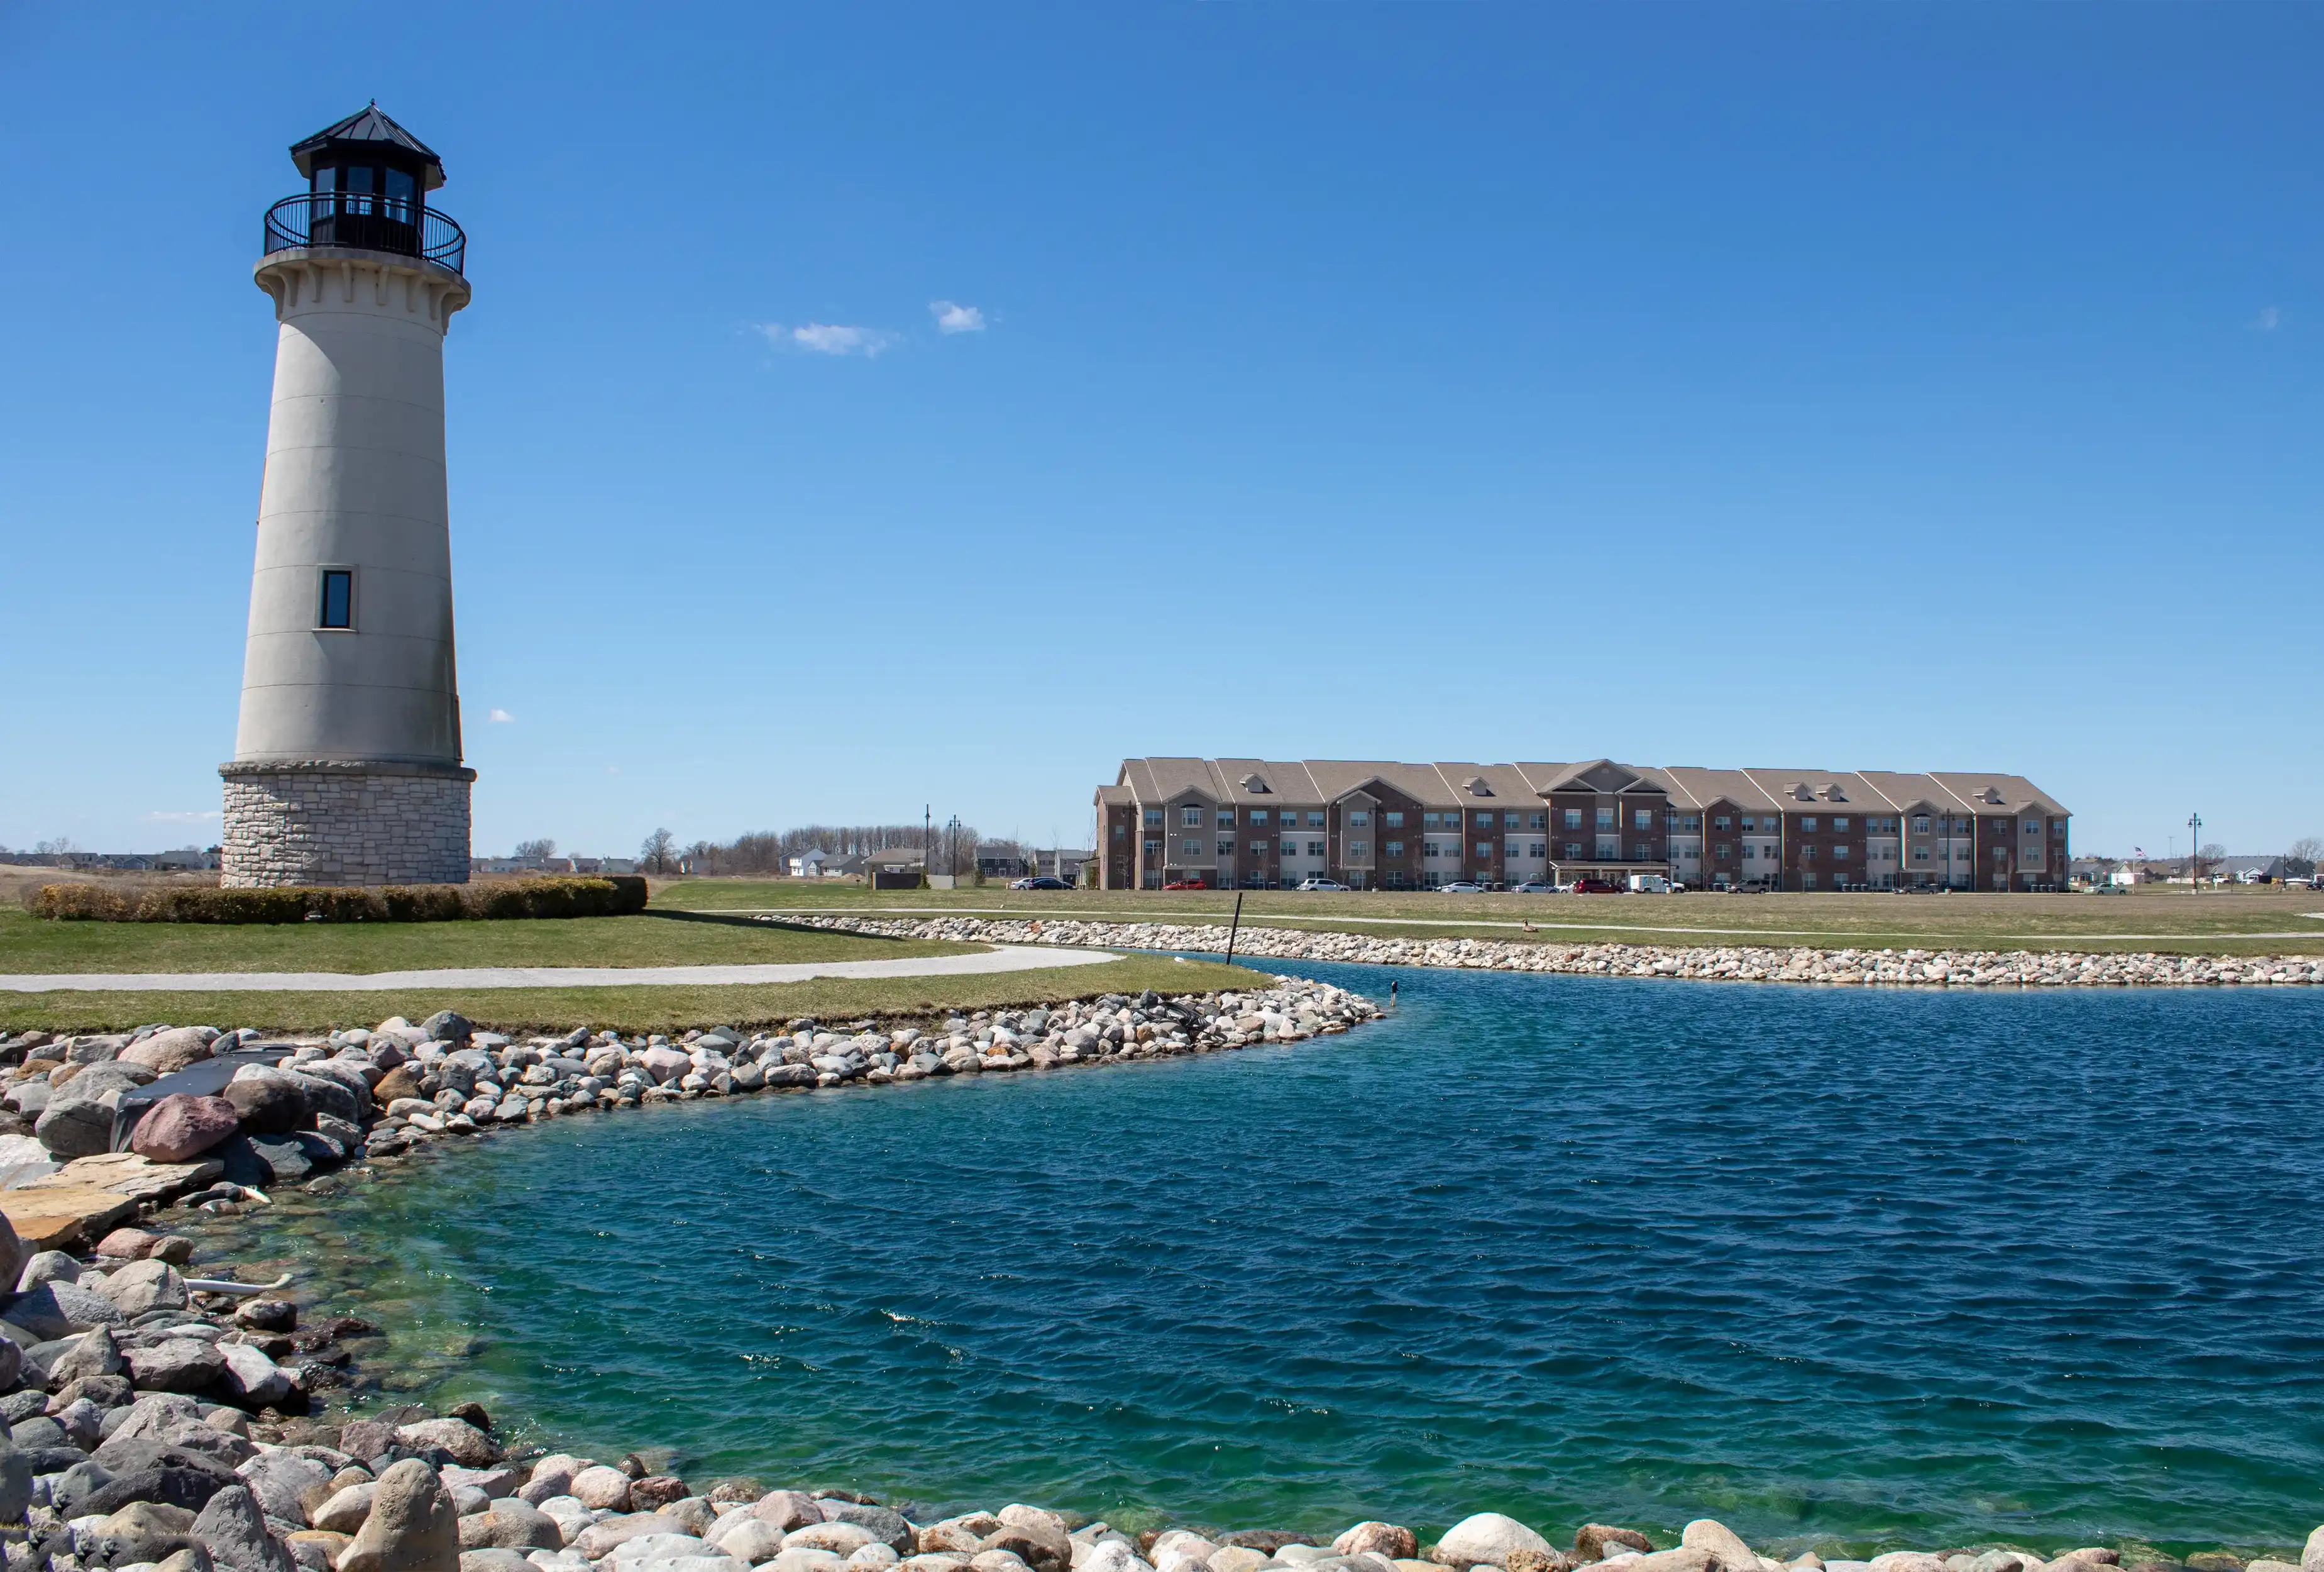 Perrysburg, OH / USA - April 15, 2019: View of the lighthouse and Harbor Town Senior Residence in Perrysburg, Ohio.